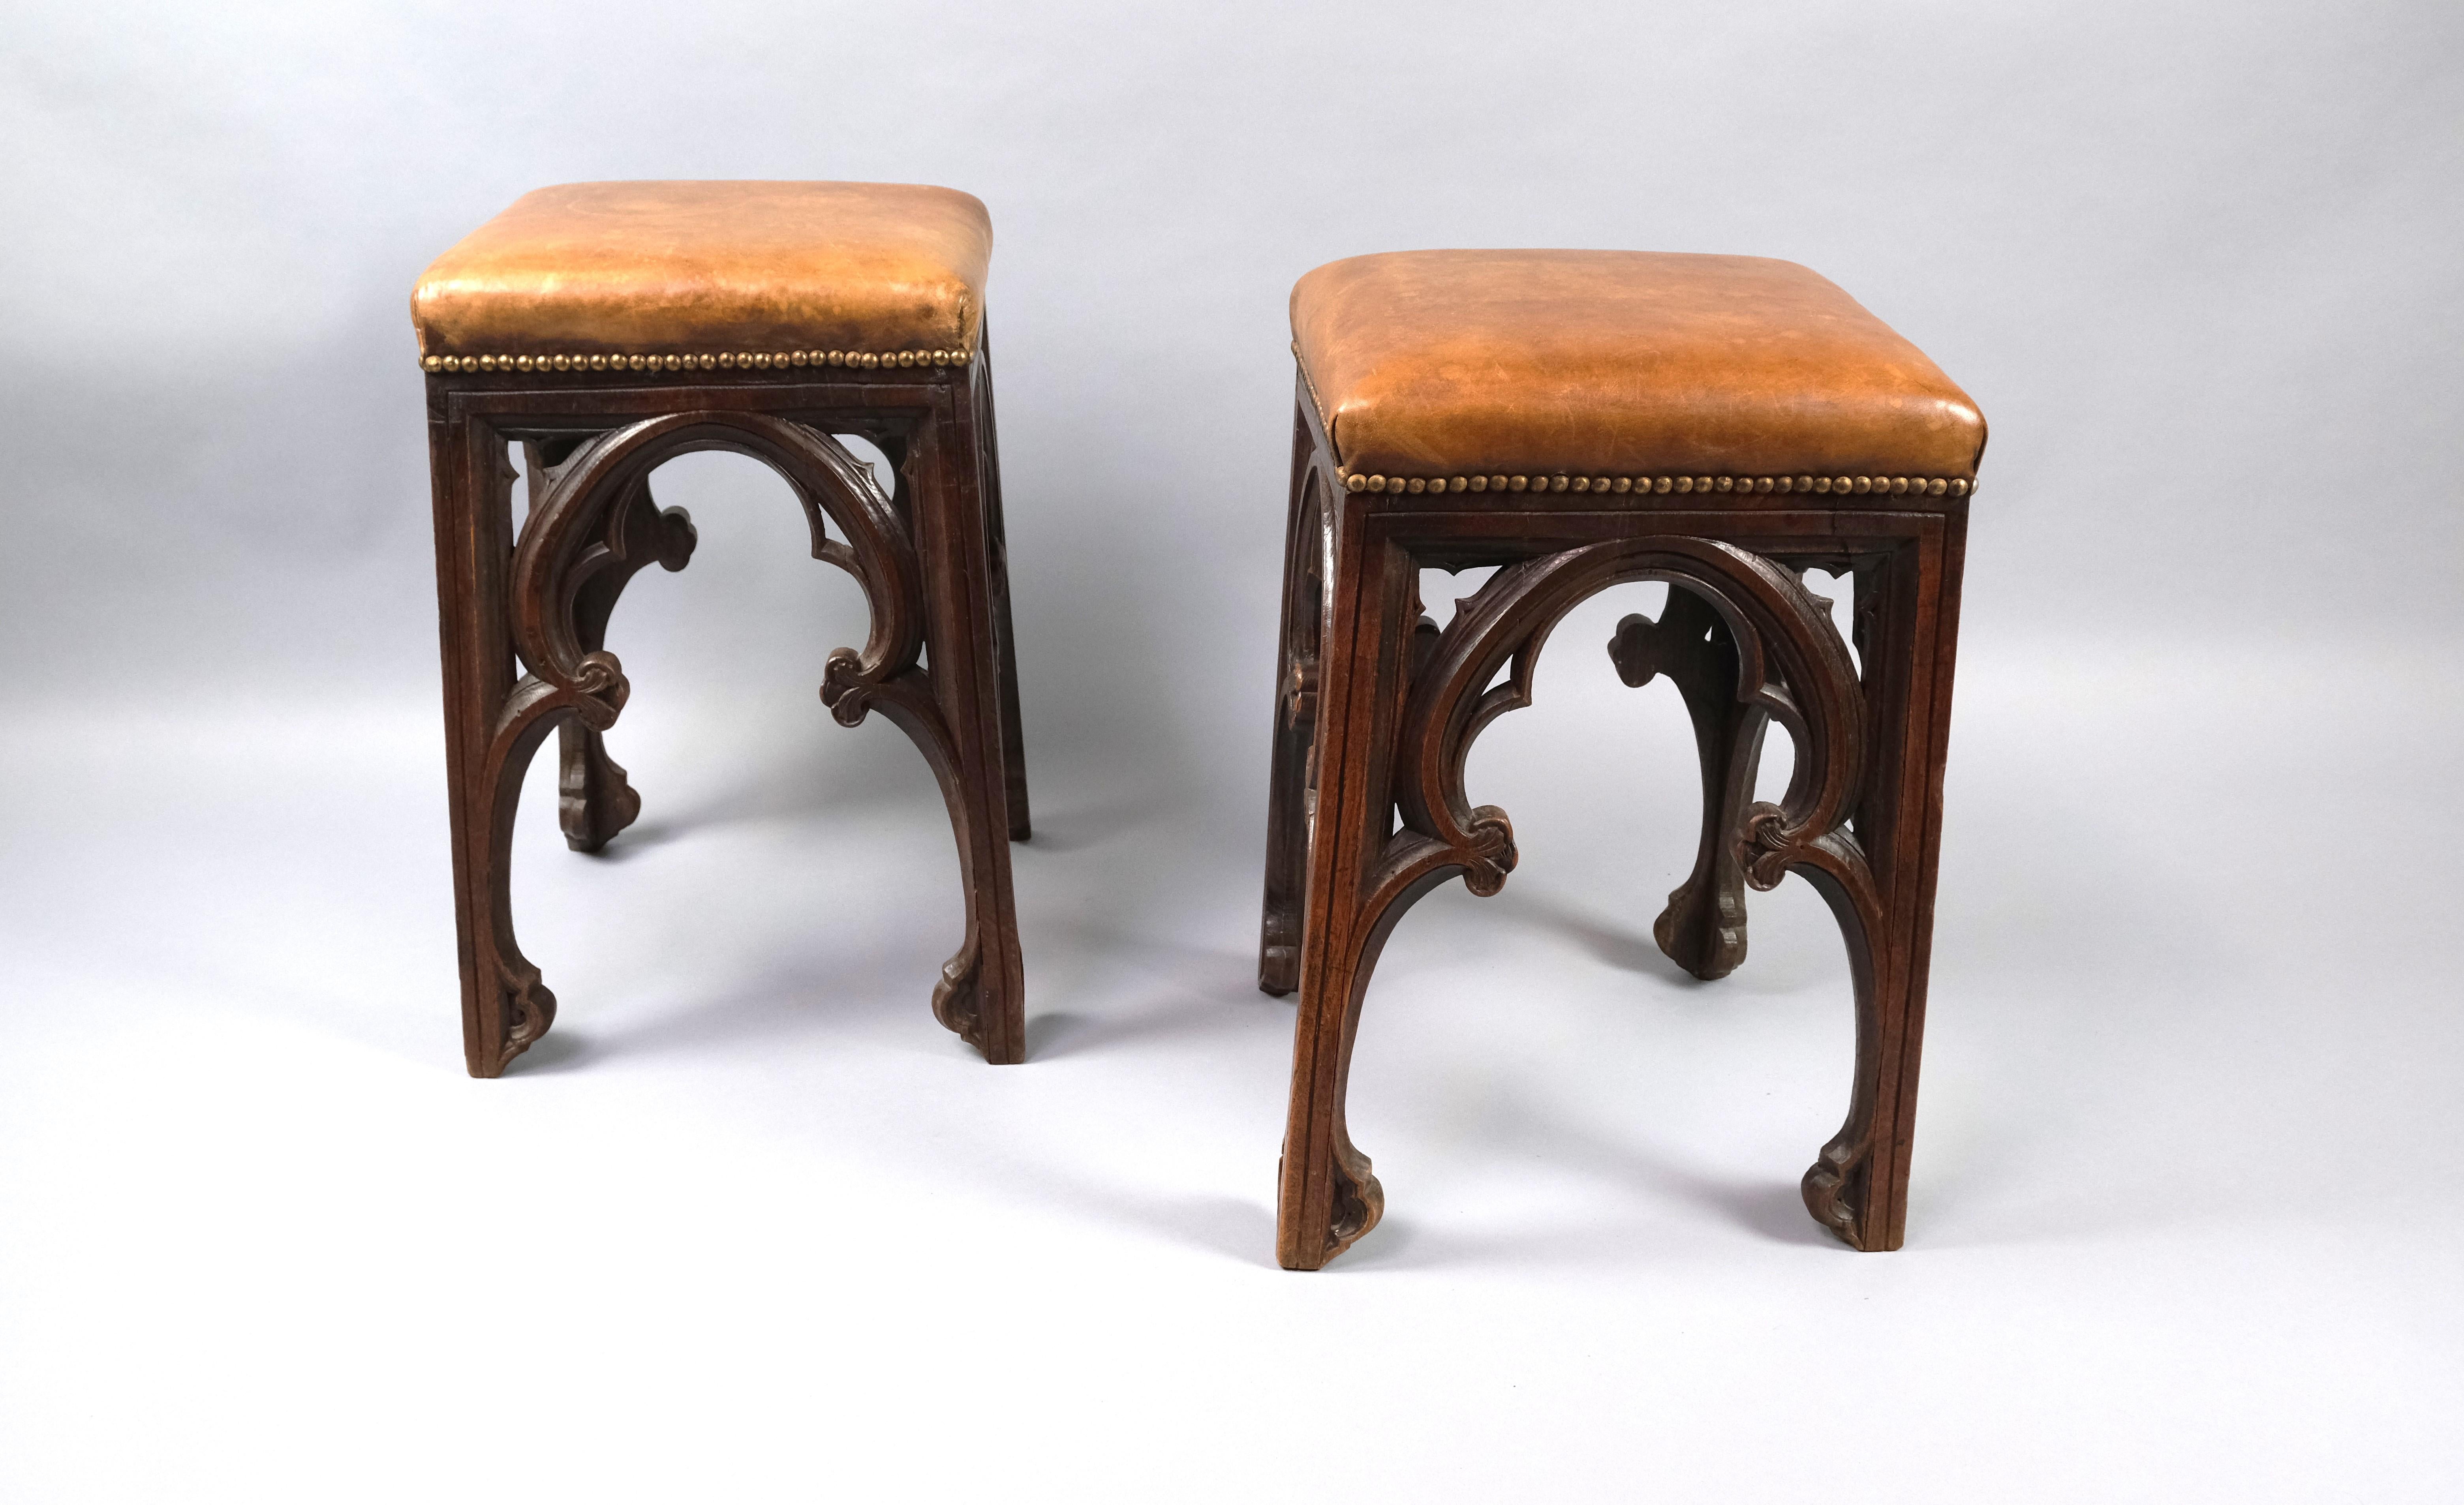 Hutton-Clarke Antiques is delighted to present this exceptional Pair of Late 19th-Century French Gothic Antique Oak Stools. These stools boast strikingly high proportions and are distinguished by their beautifully patinated leather seats.

These